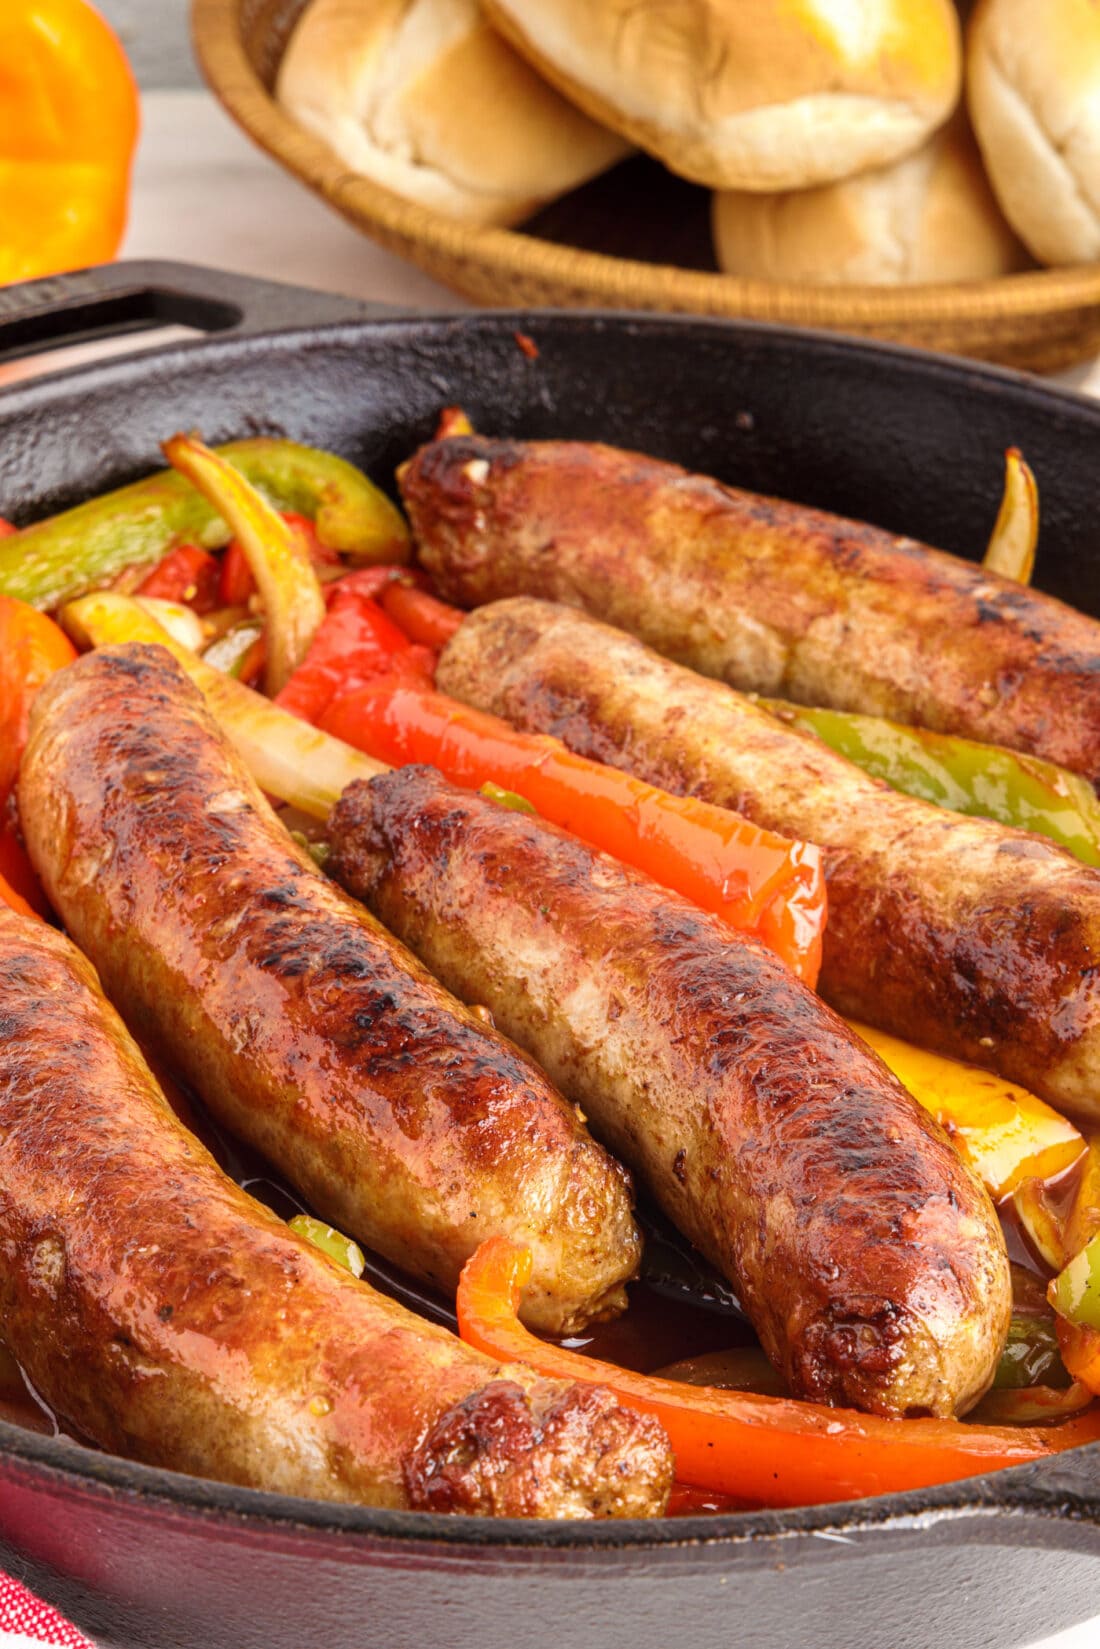 Sausage and Peppers in a skillet